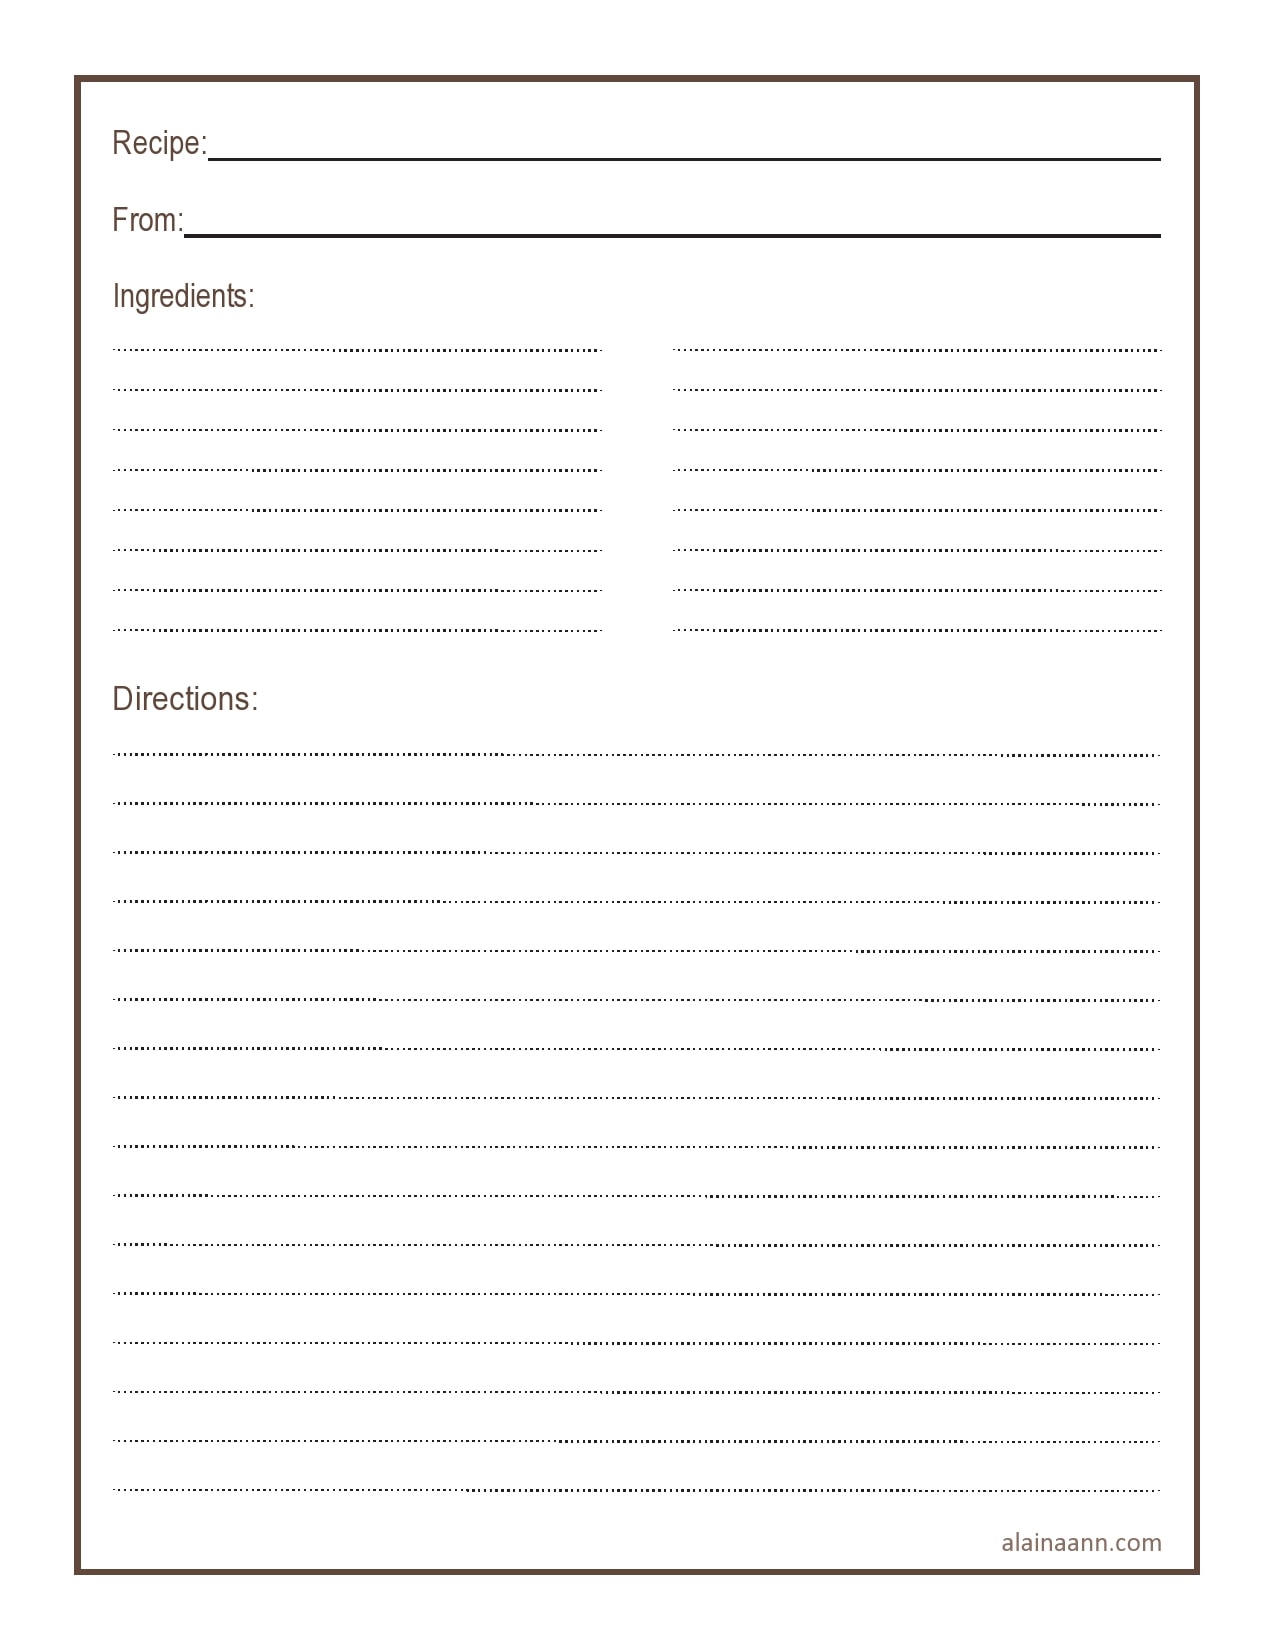 Blank Recipe Template from templatearchive.com